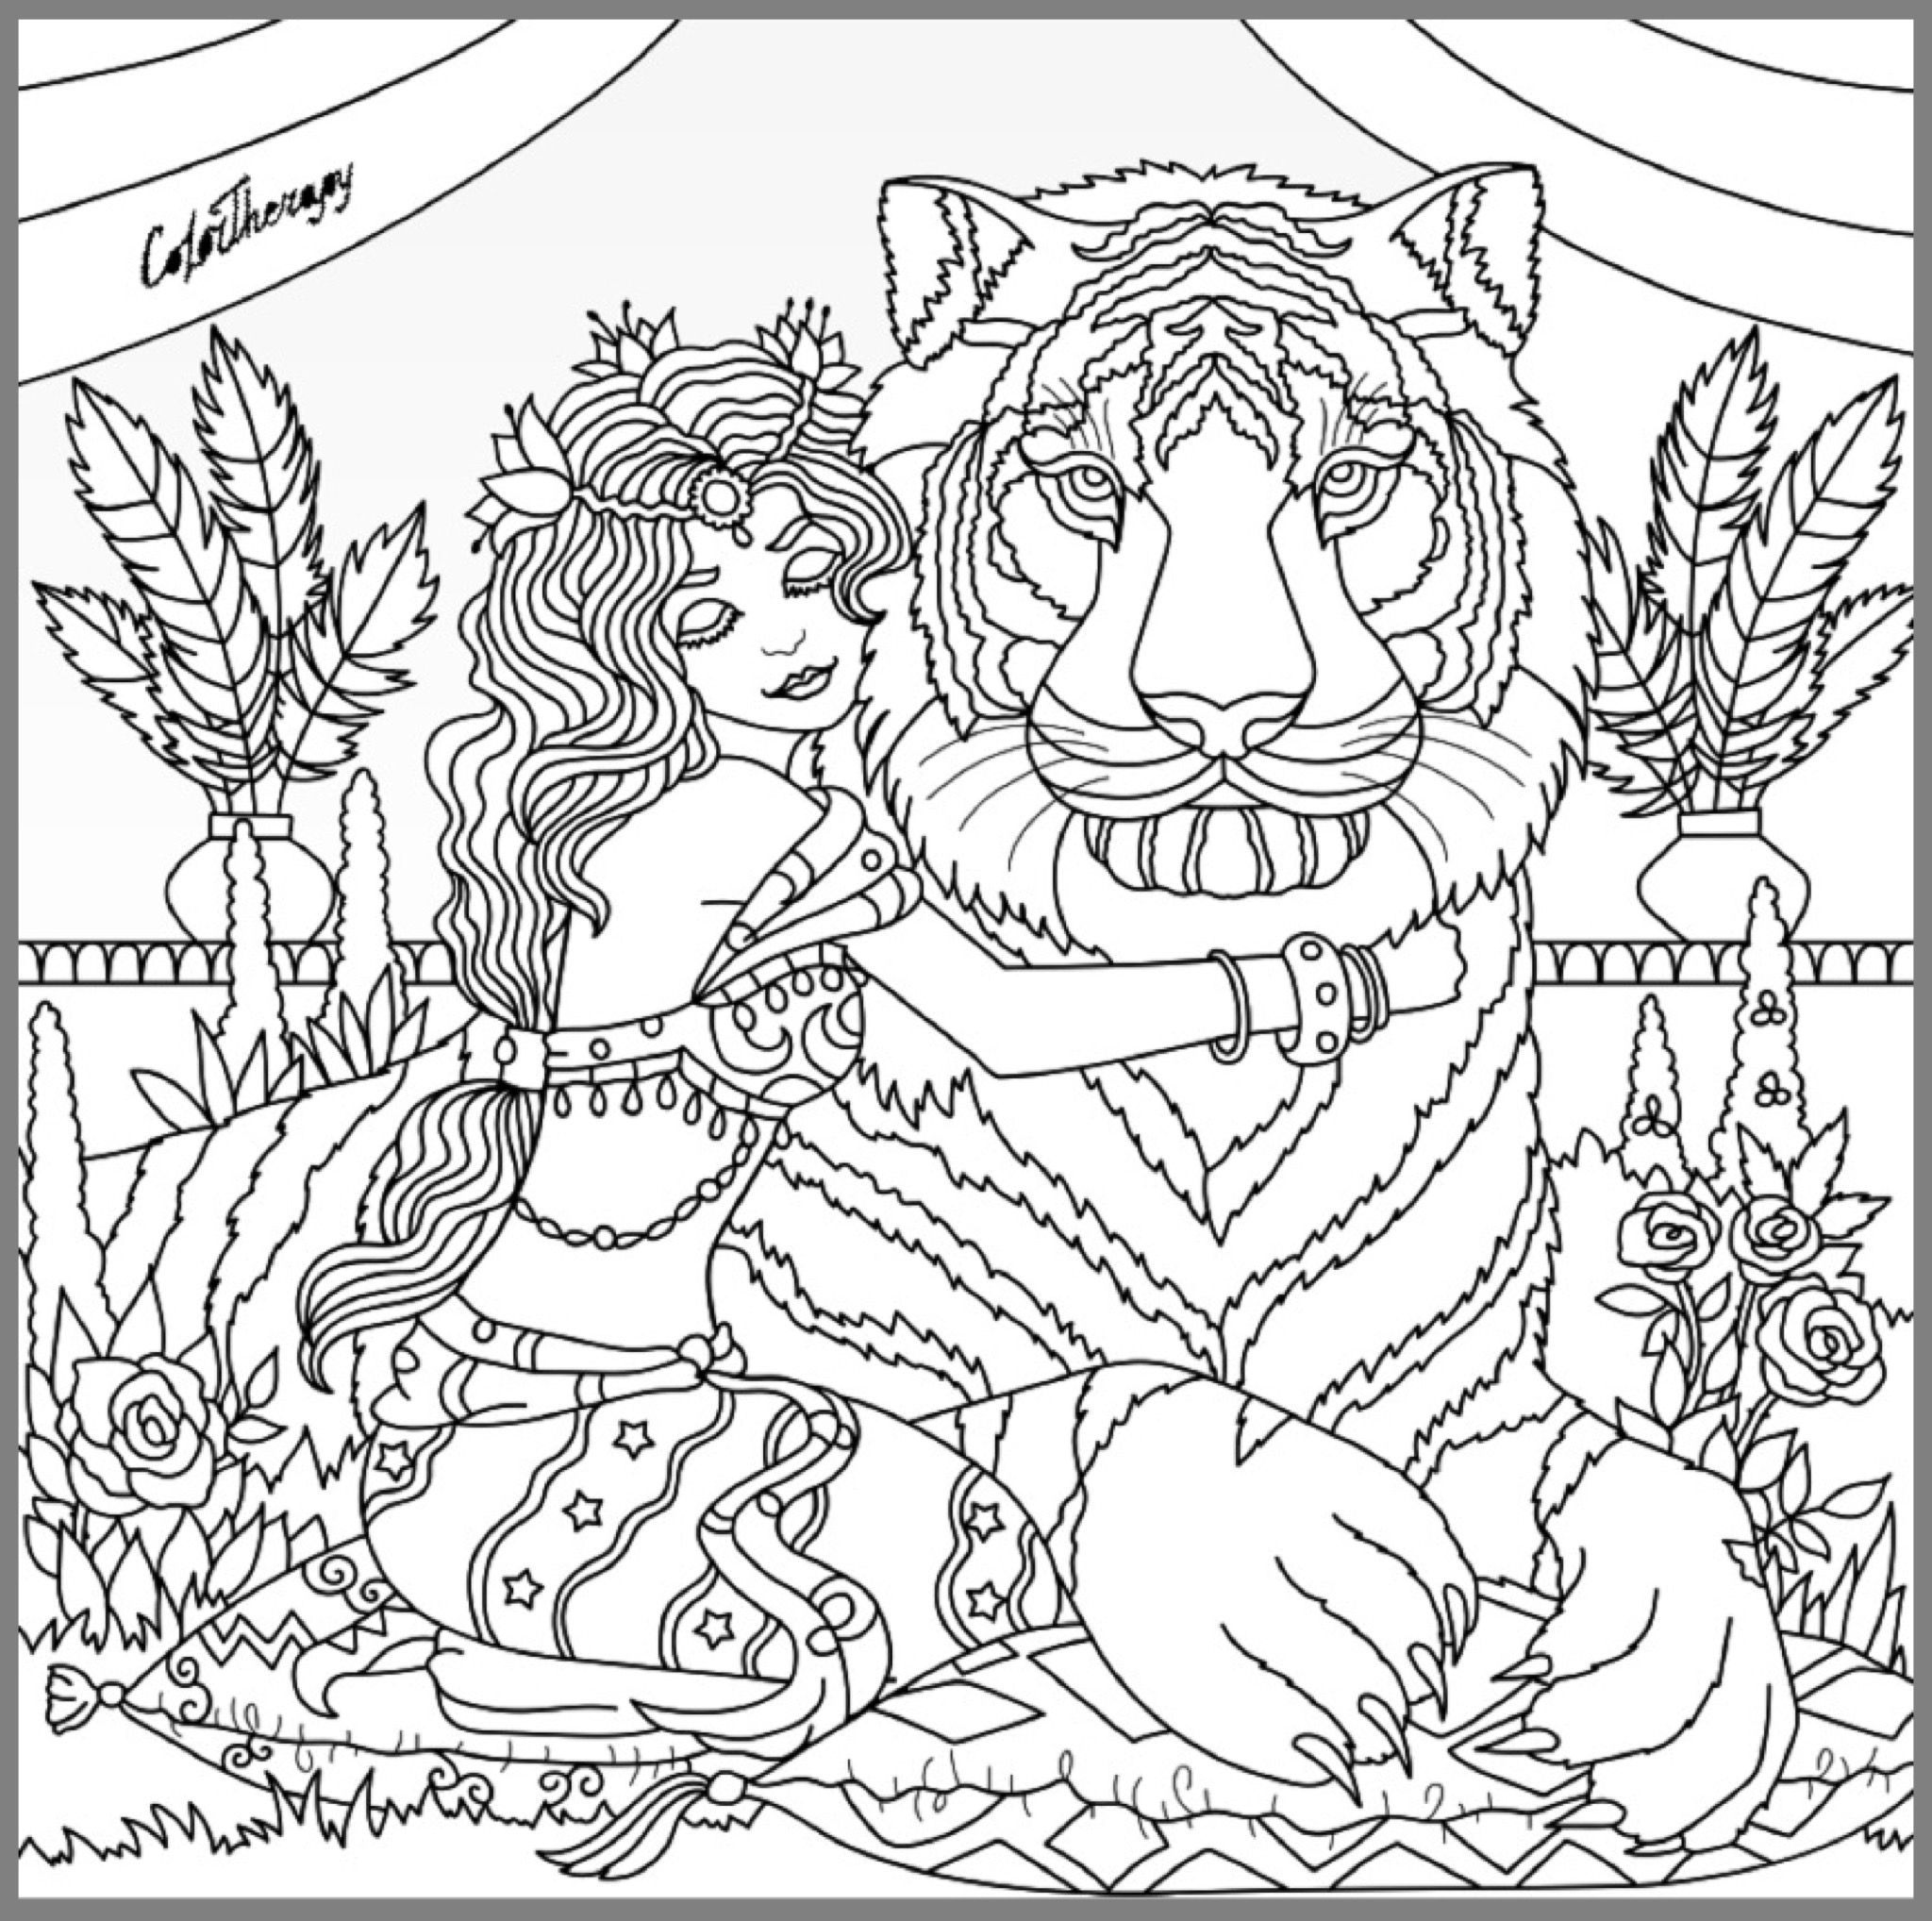 Jungle Coloring Pages For Adults at GetColorings.com | Free printable